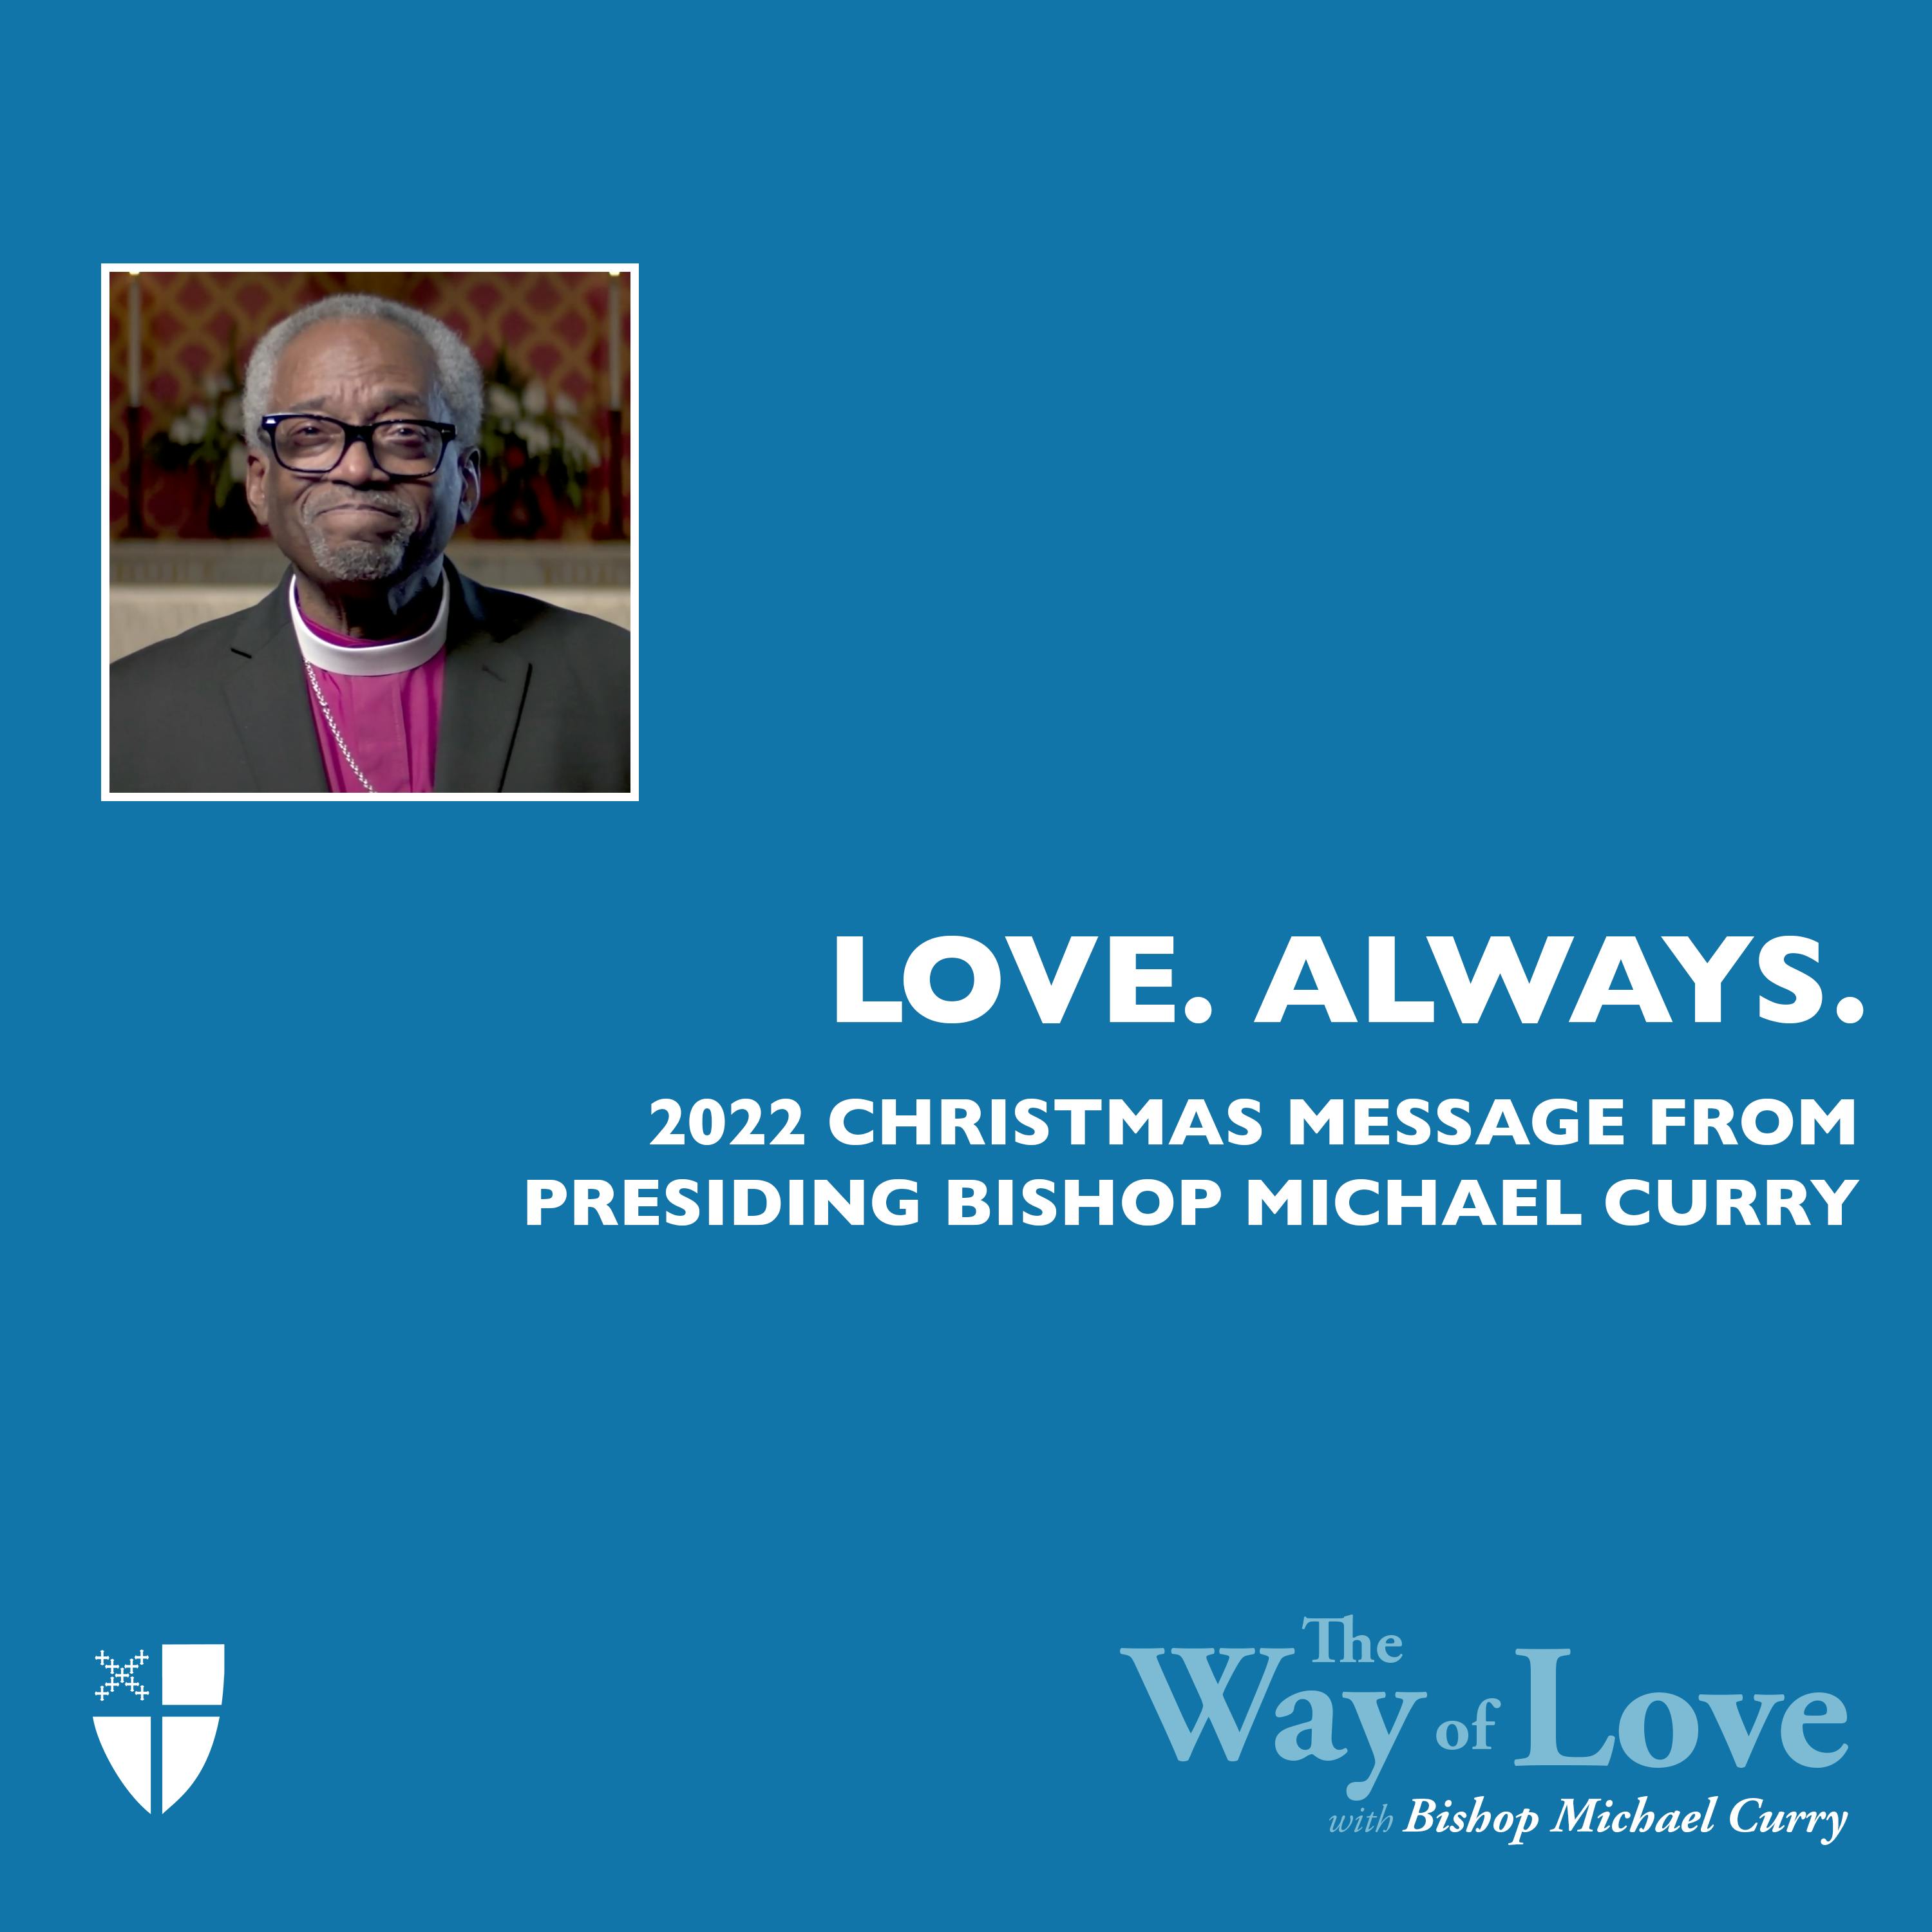 Special Episode: Love. Always. - Presiding Bishop Michael Curry’s 2022 Christmas Message